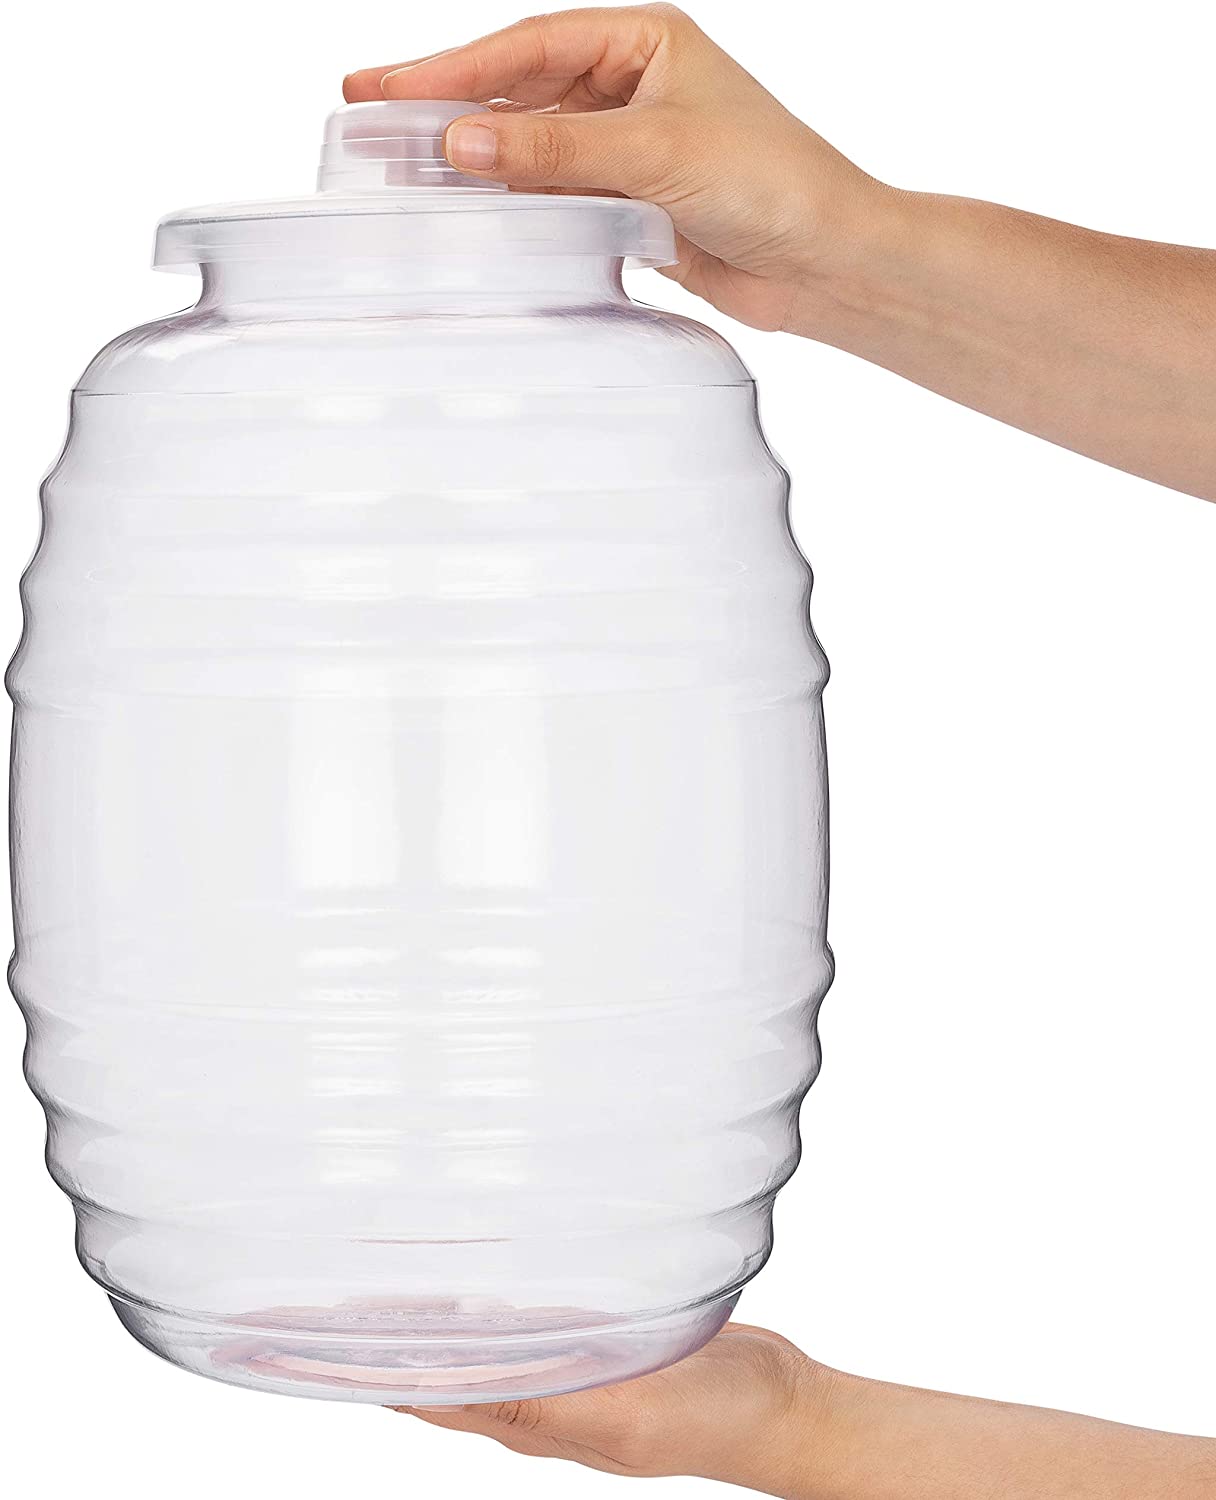 5 Gallon Jug with Lid - BPA Free - Aguas Frescas Vitrolero Plastic Water  Container - 5 Gallon Drink Dispenser - Large Beverage Dispenser Ideal for